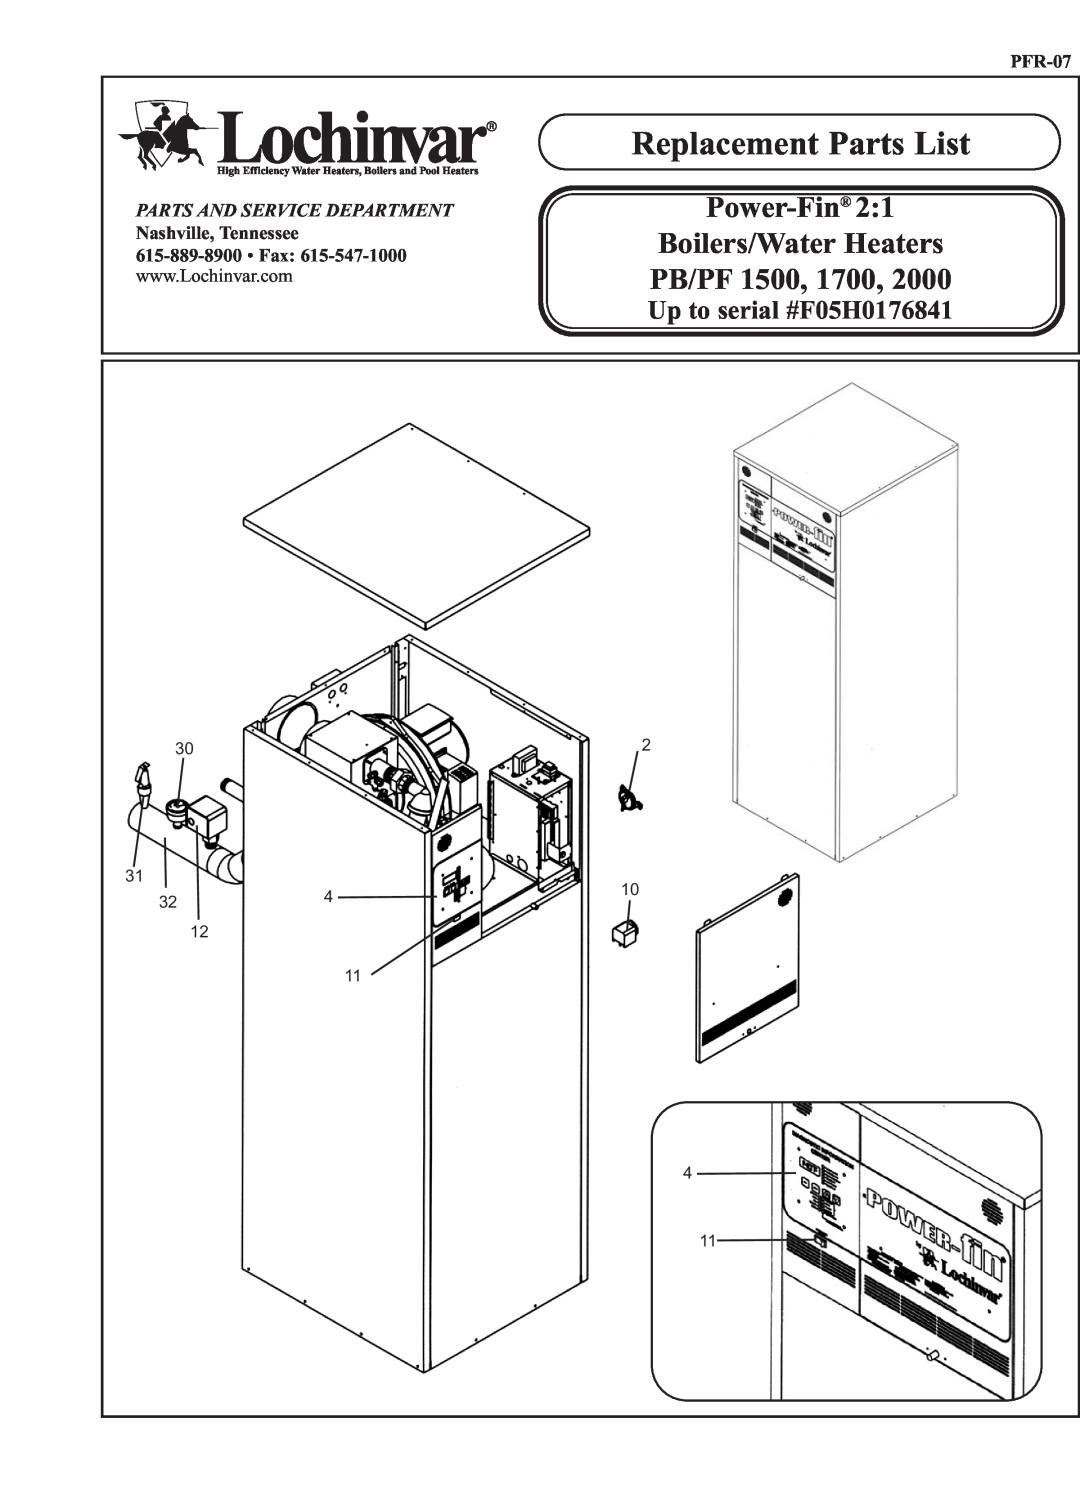 Lochinvar manual Replacement Parts List, Power-Fin, Boilers/Water Heaters, PB/PF 1500, 1700, Up to serial #F05H0176841 